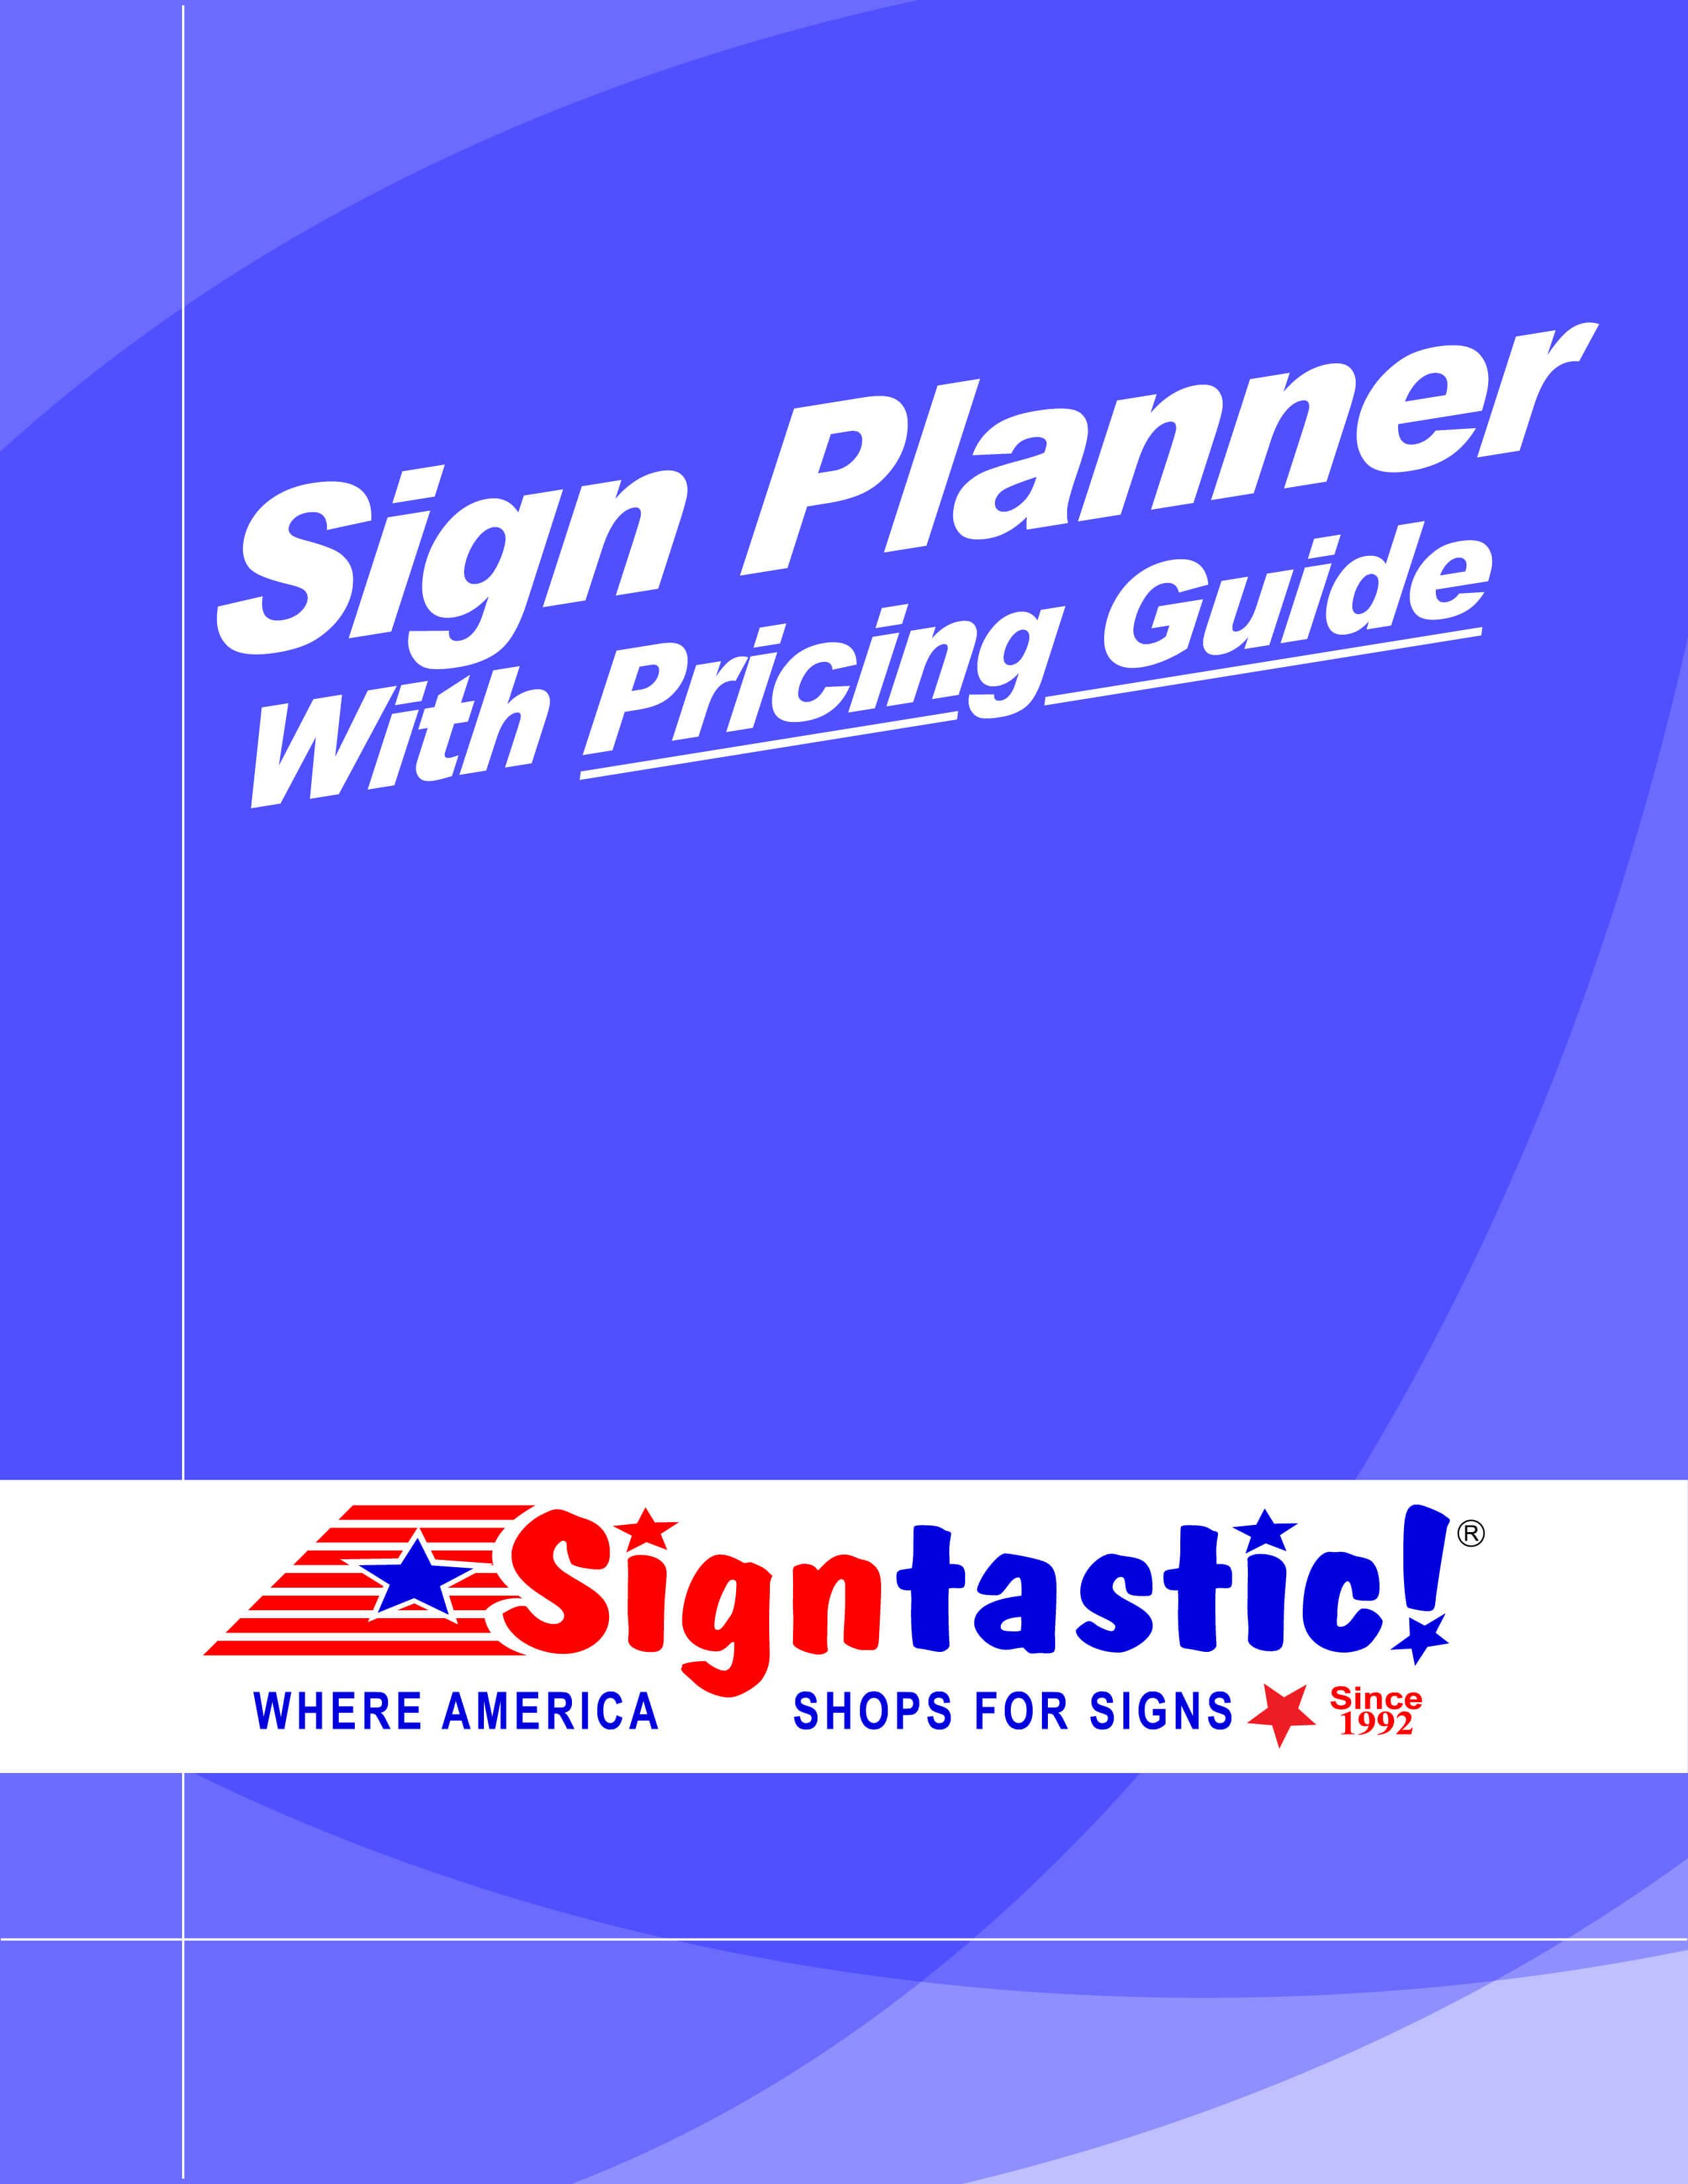 Sign Planner & Guide